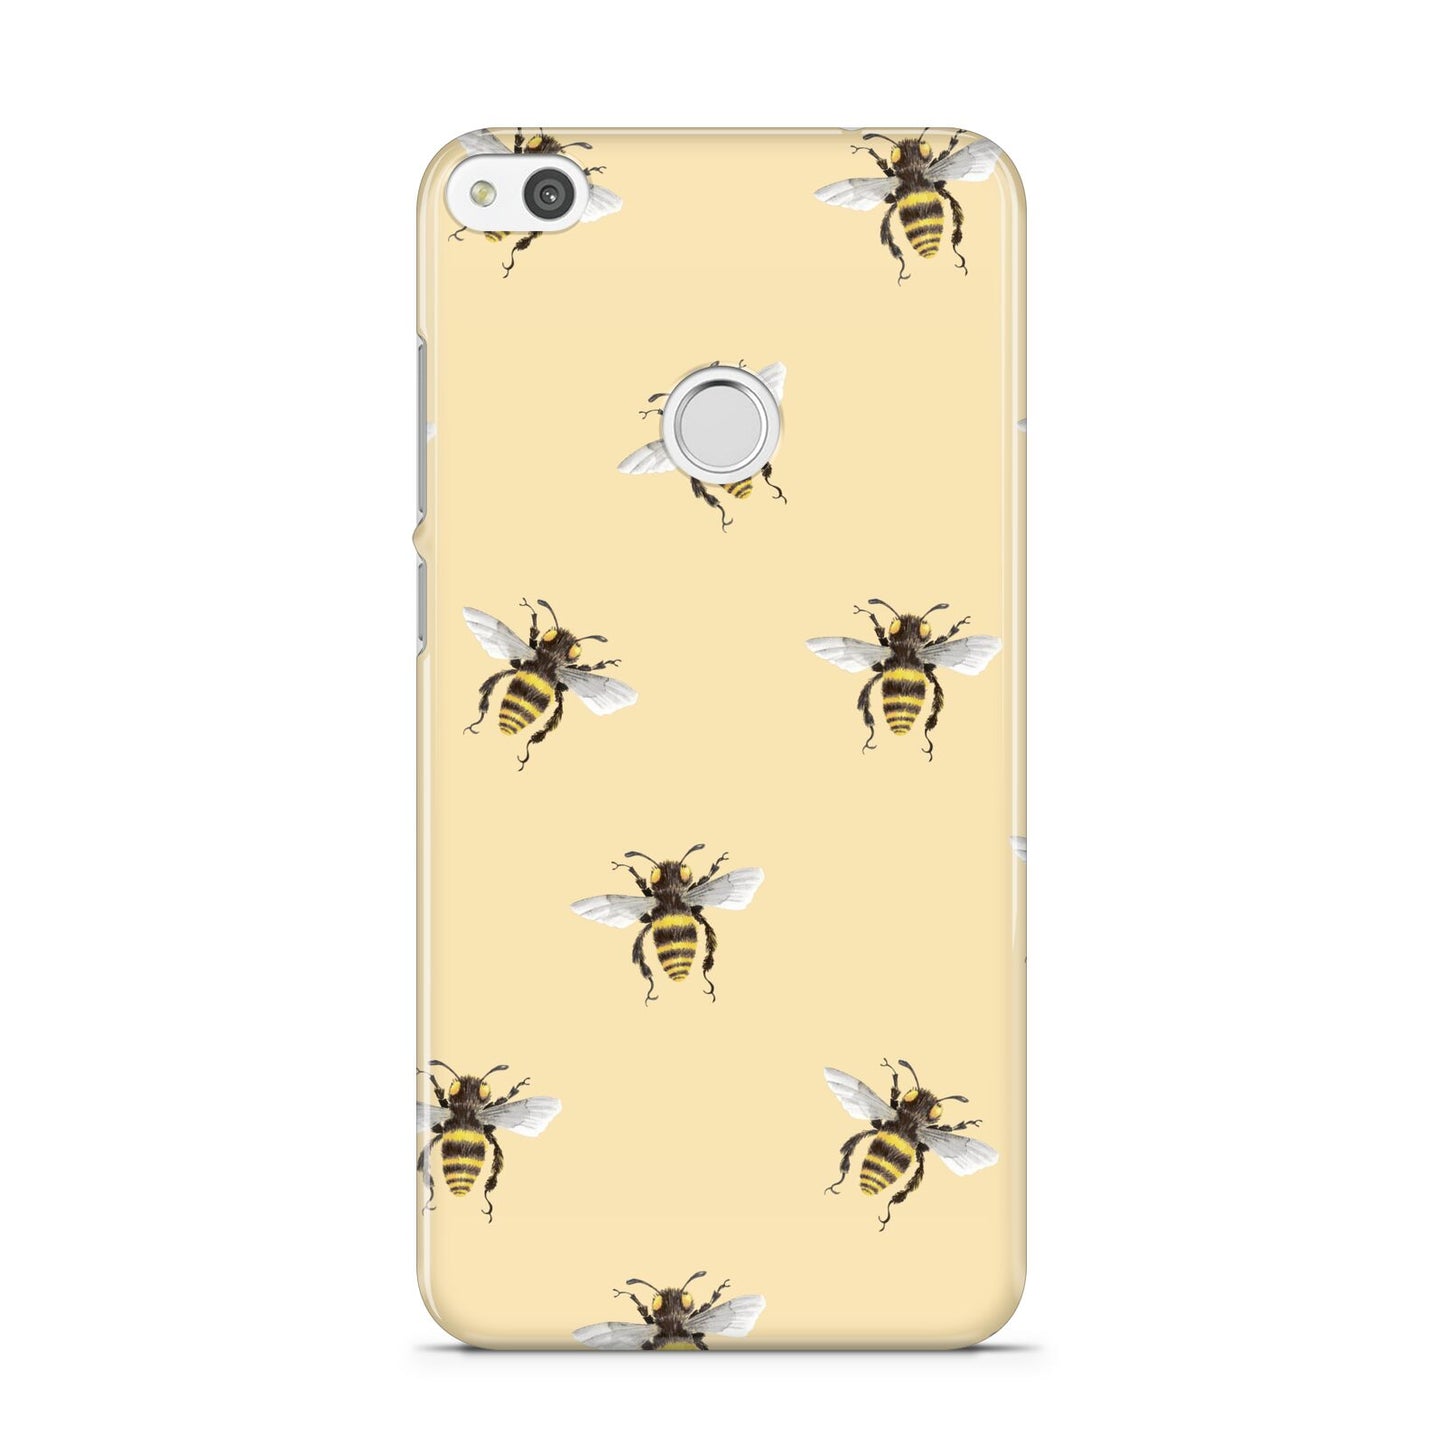 Bee Illustrations Huawei P8 Lite Case